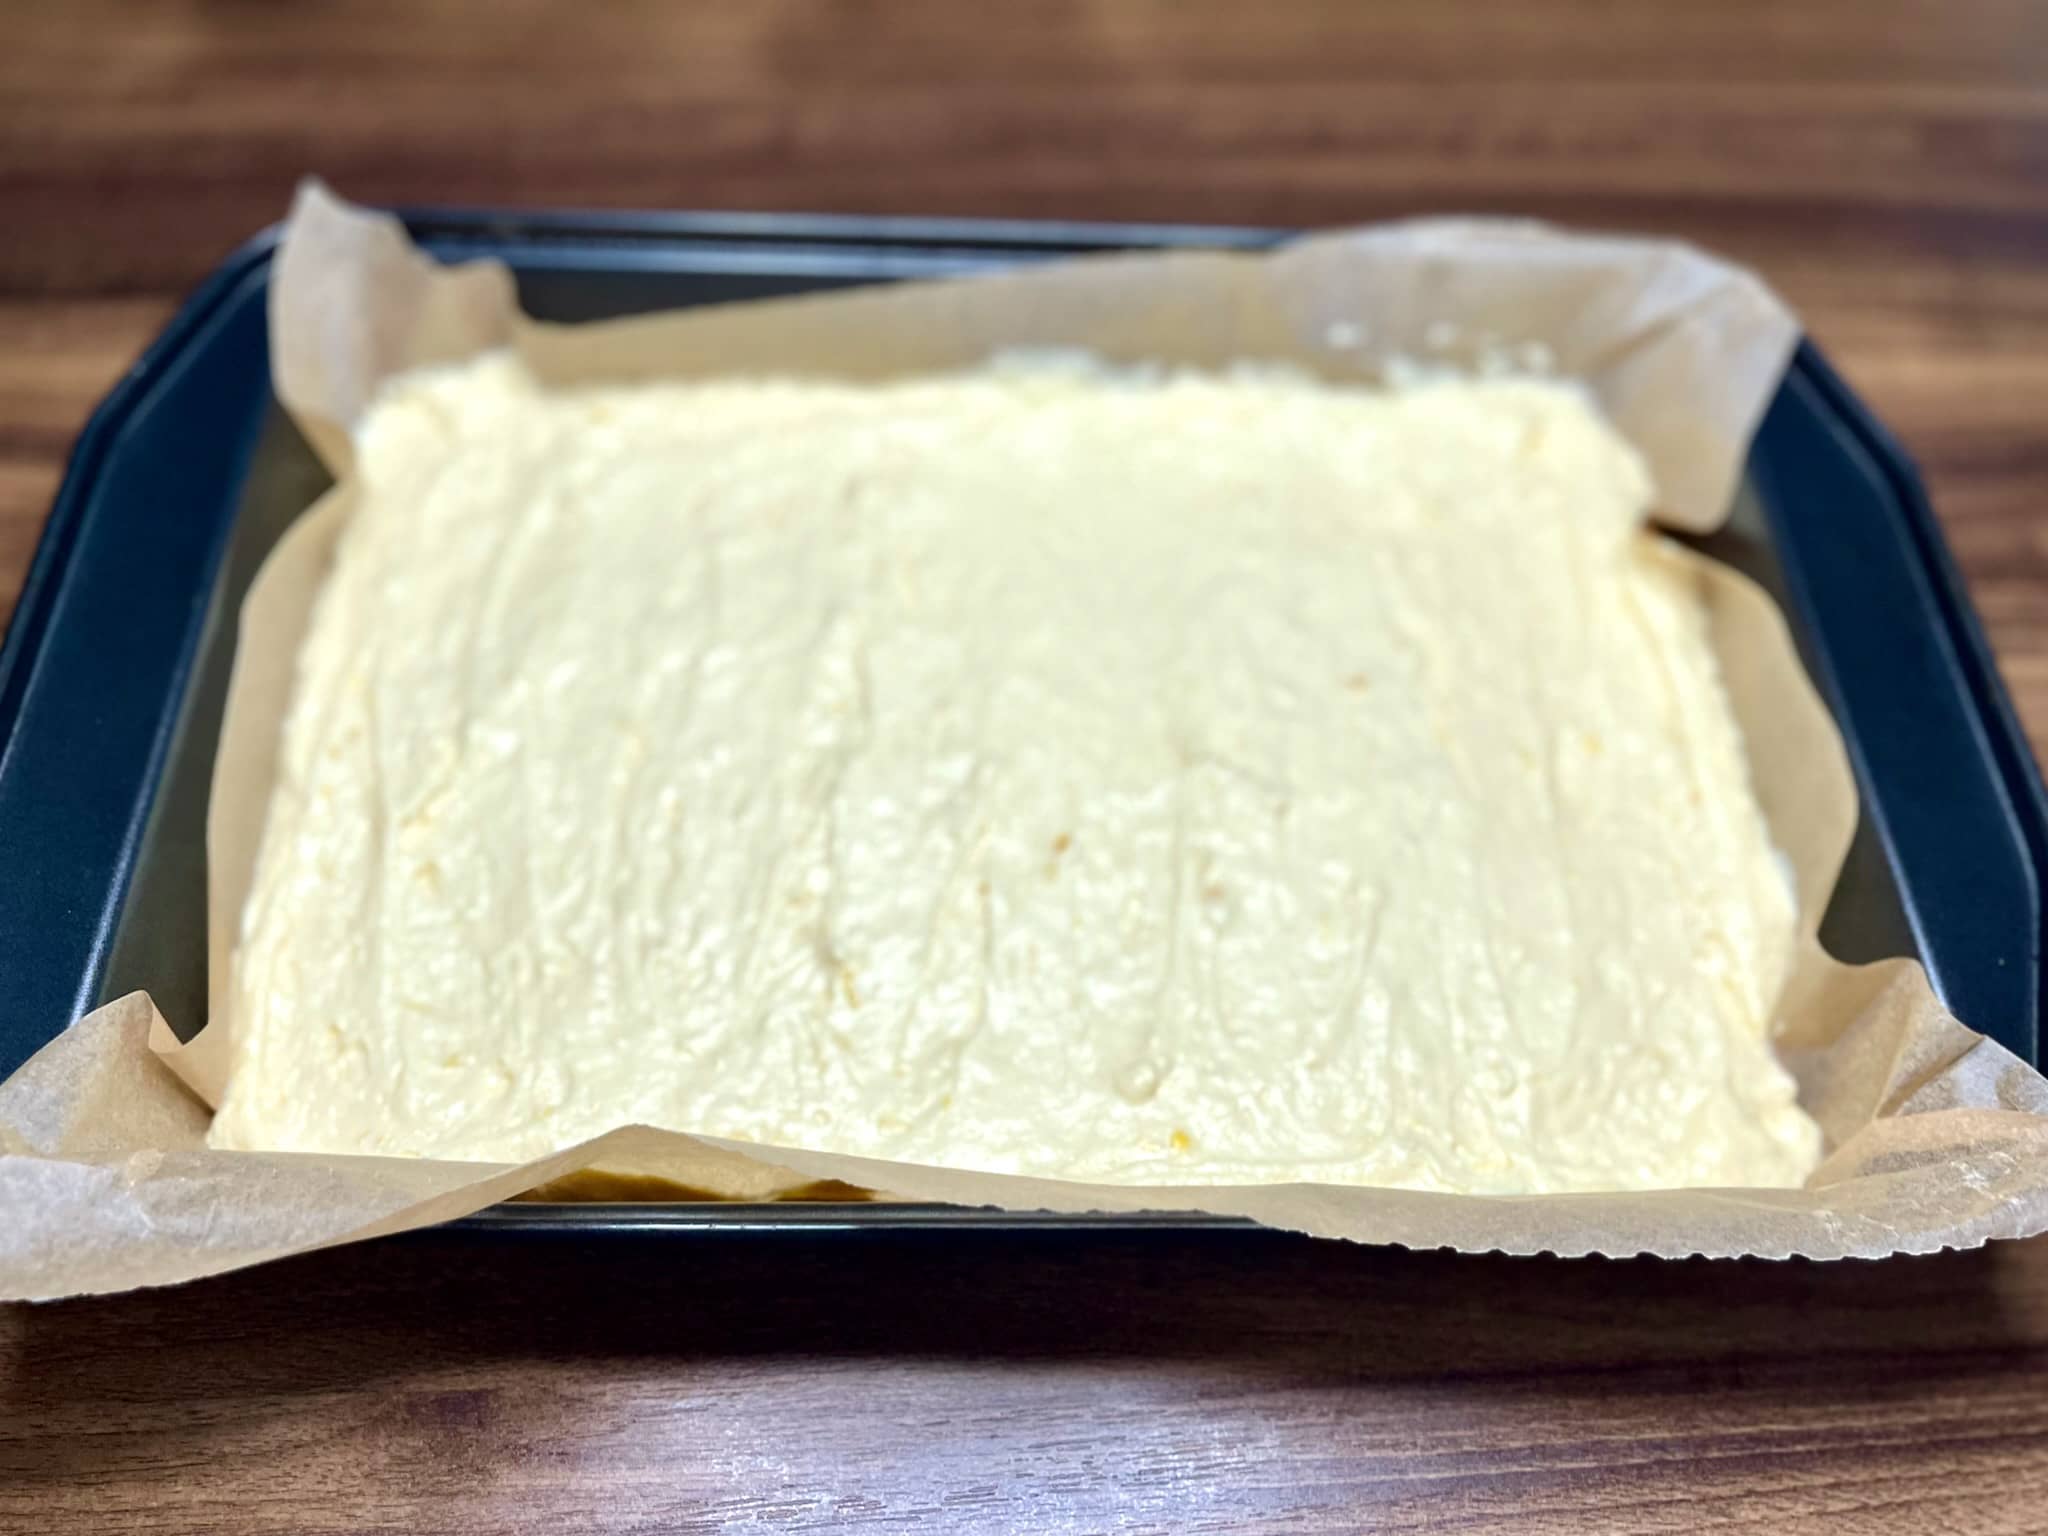 The batter is in a baking tray lined with baking paper